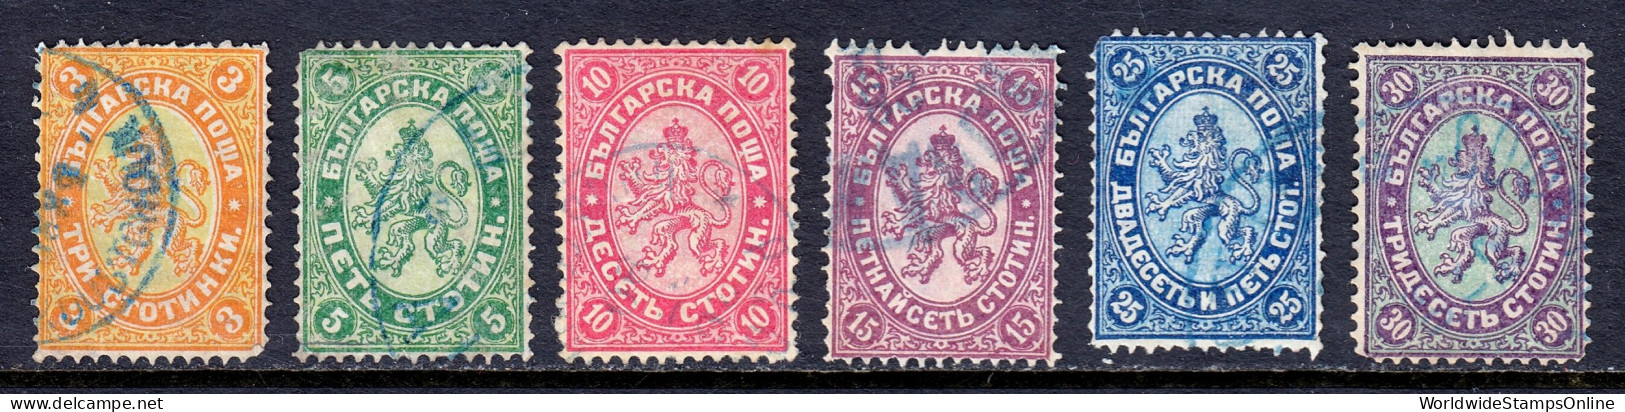 Bulgaria - Scott #12//17 - Used - A Few Perf Faults - SCV $7.20 - Used Stamps